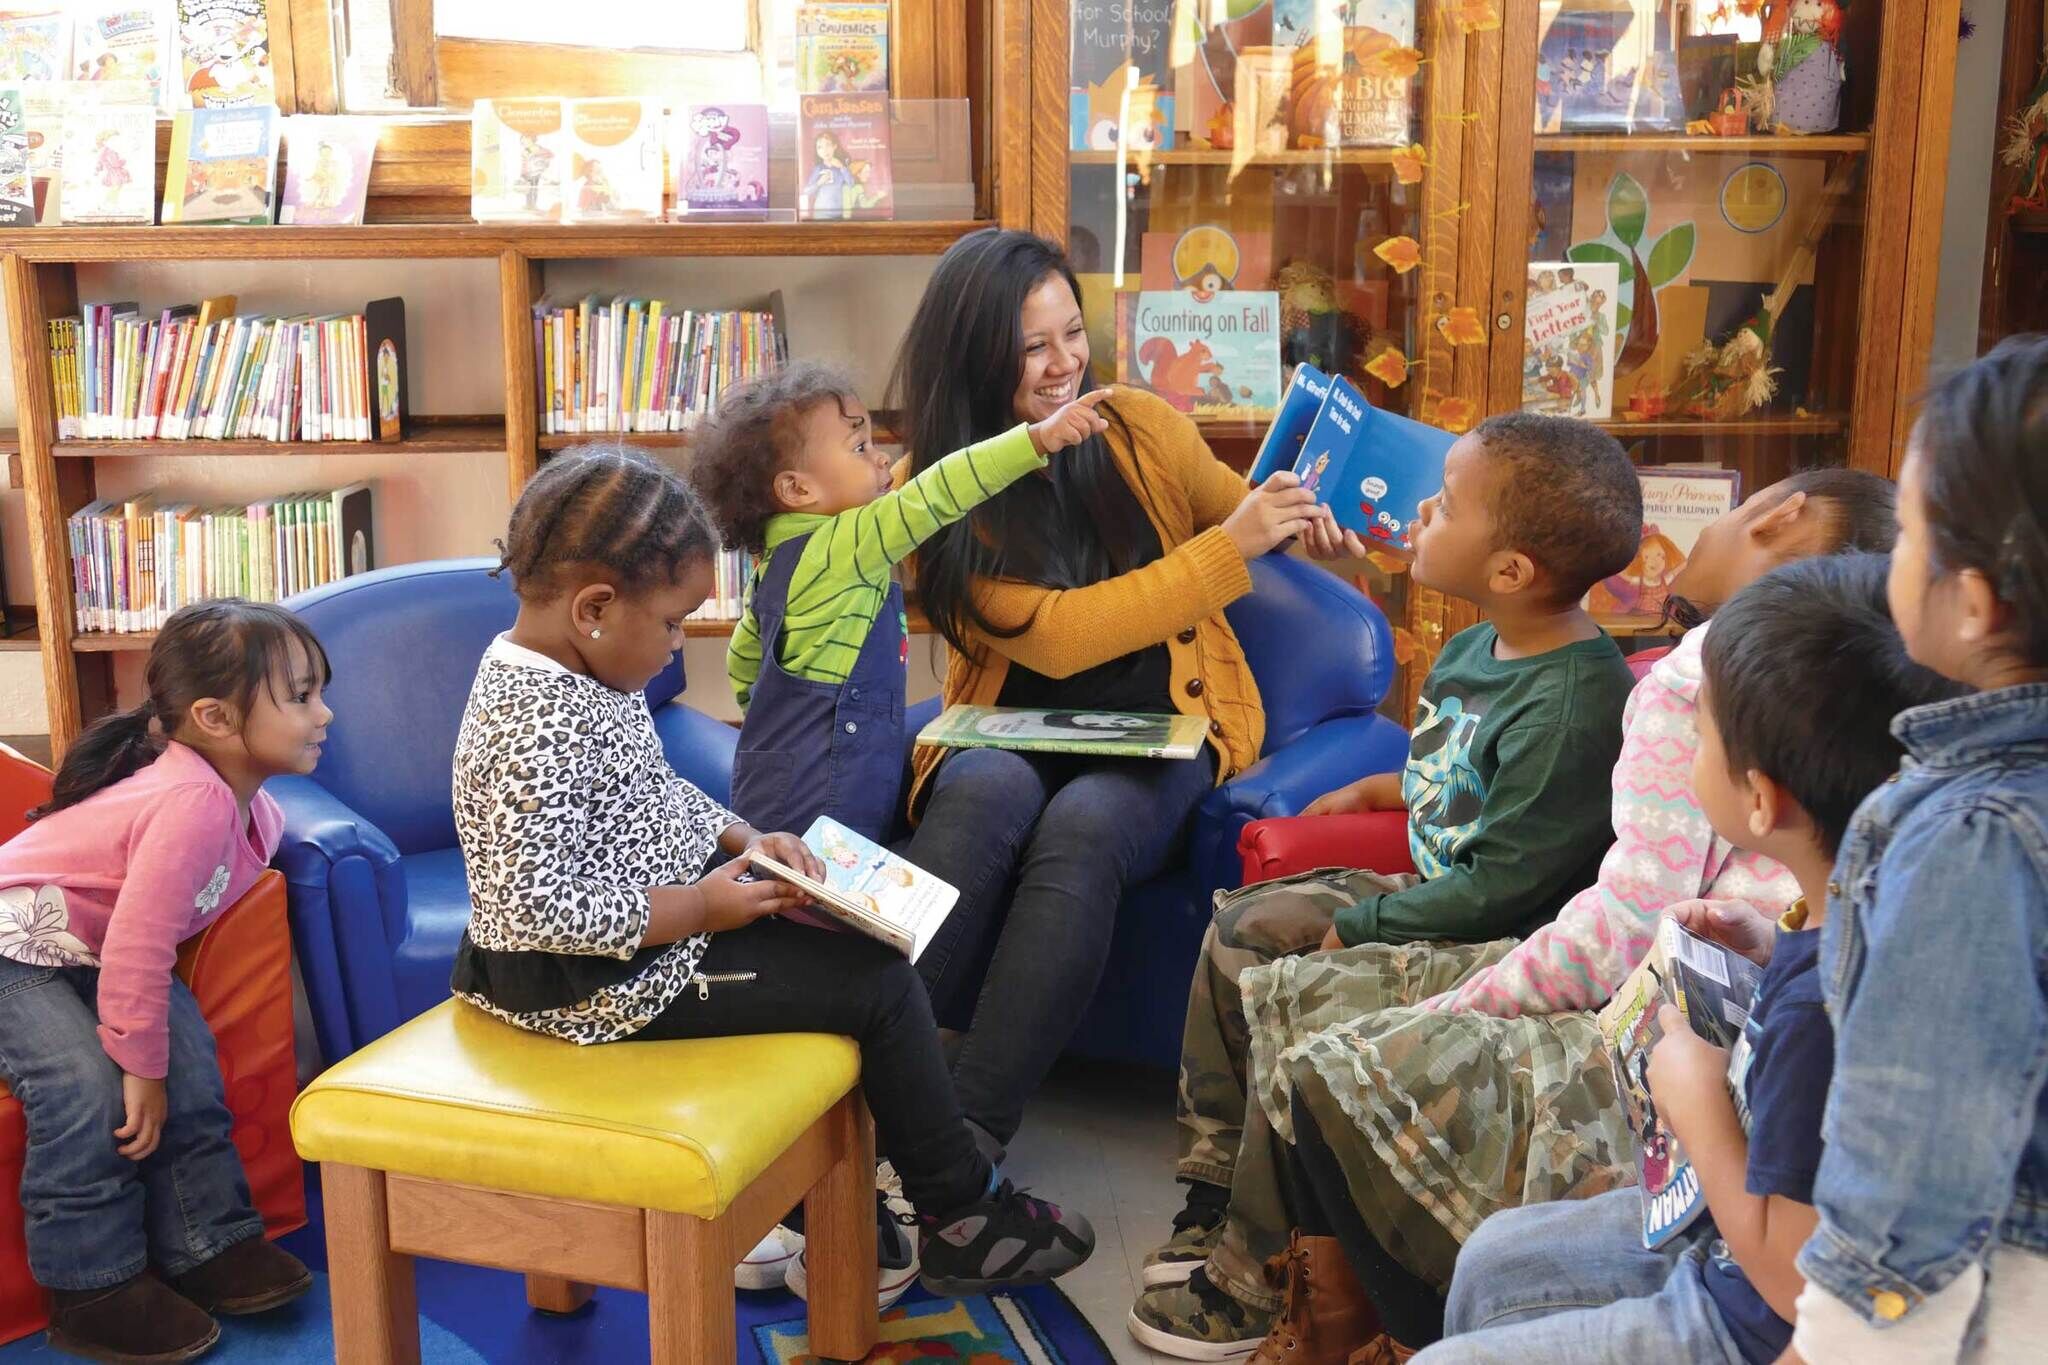 A librarian sits in the middle of a group of young children, reading a book. 